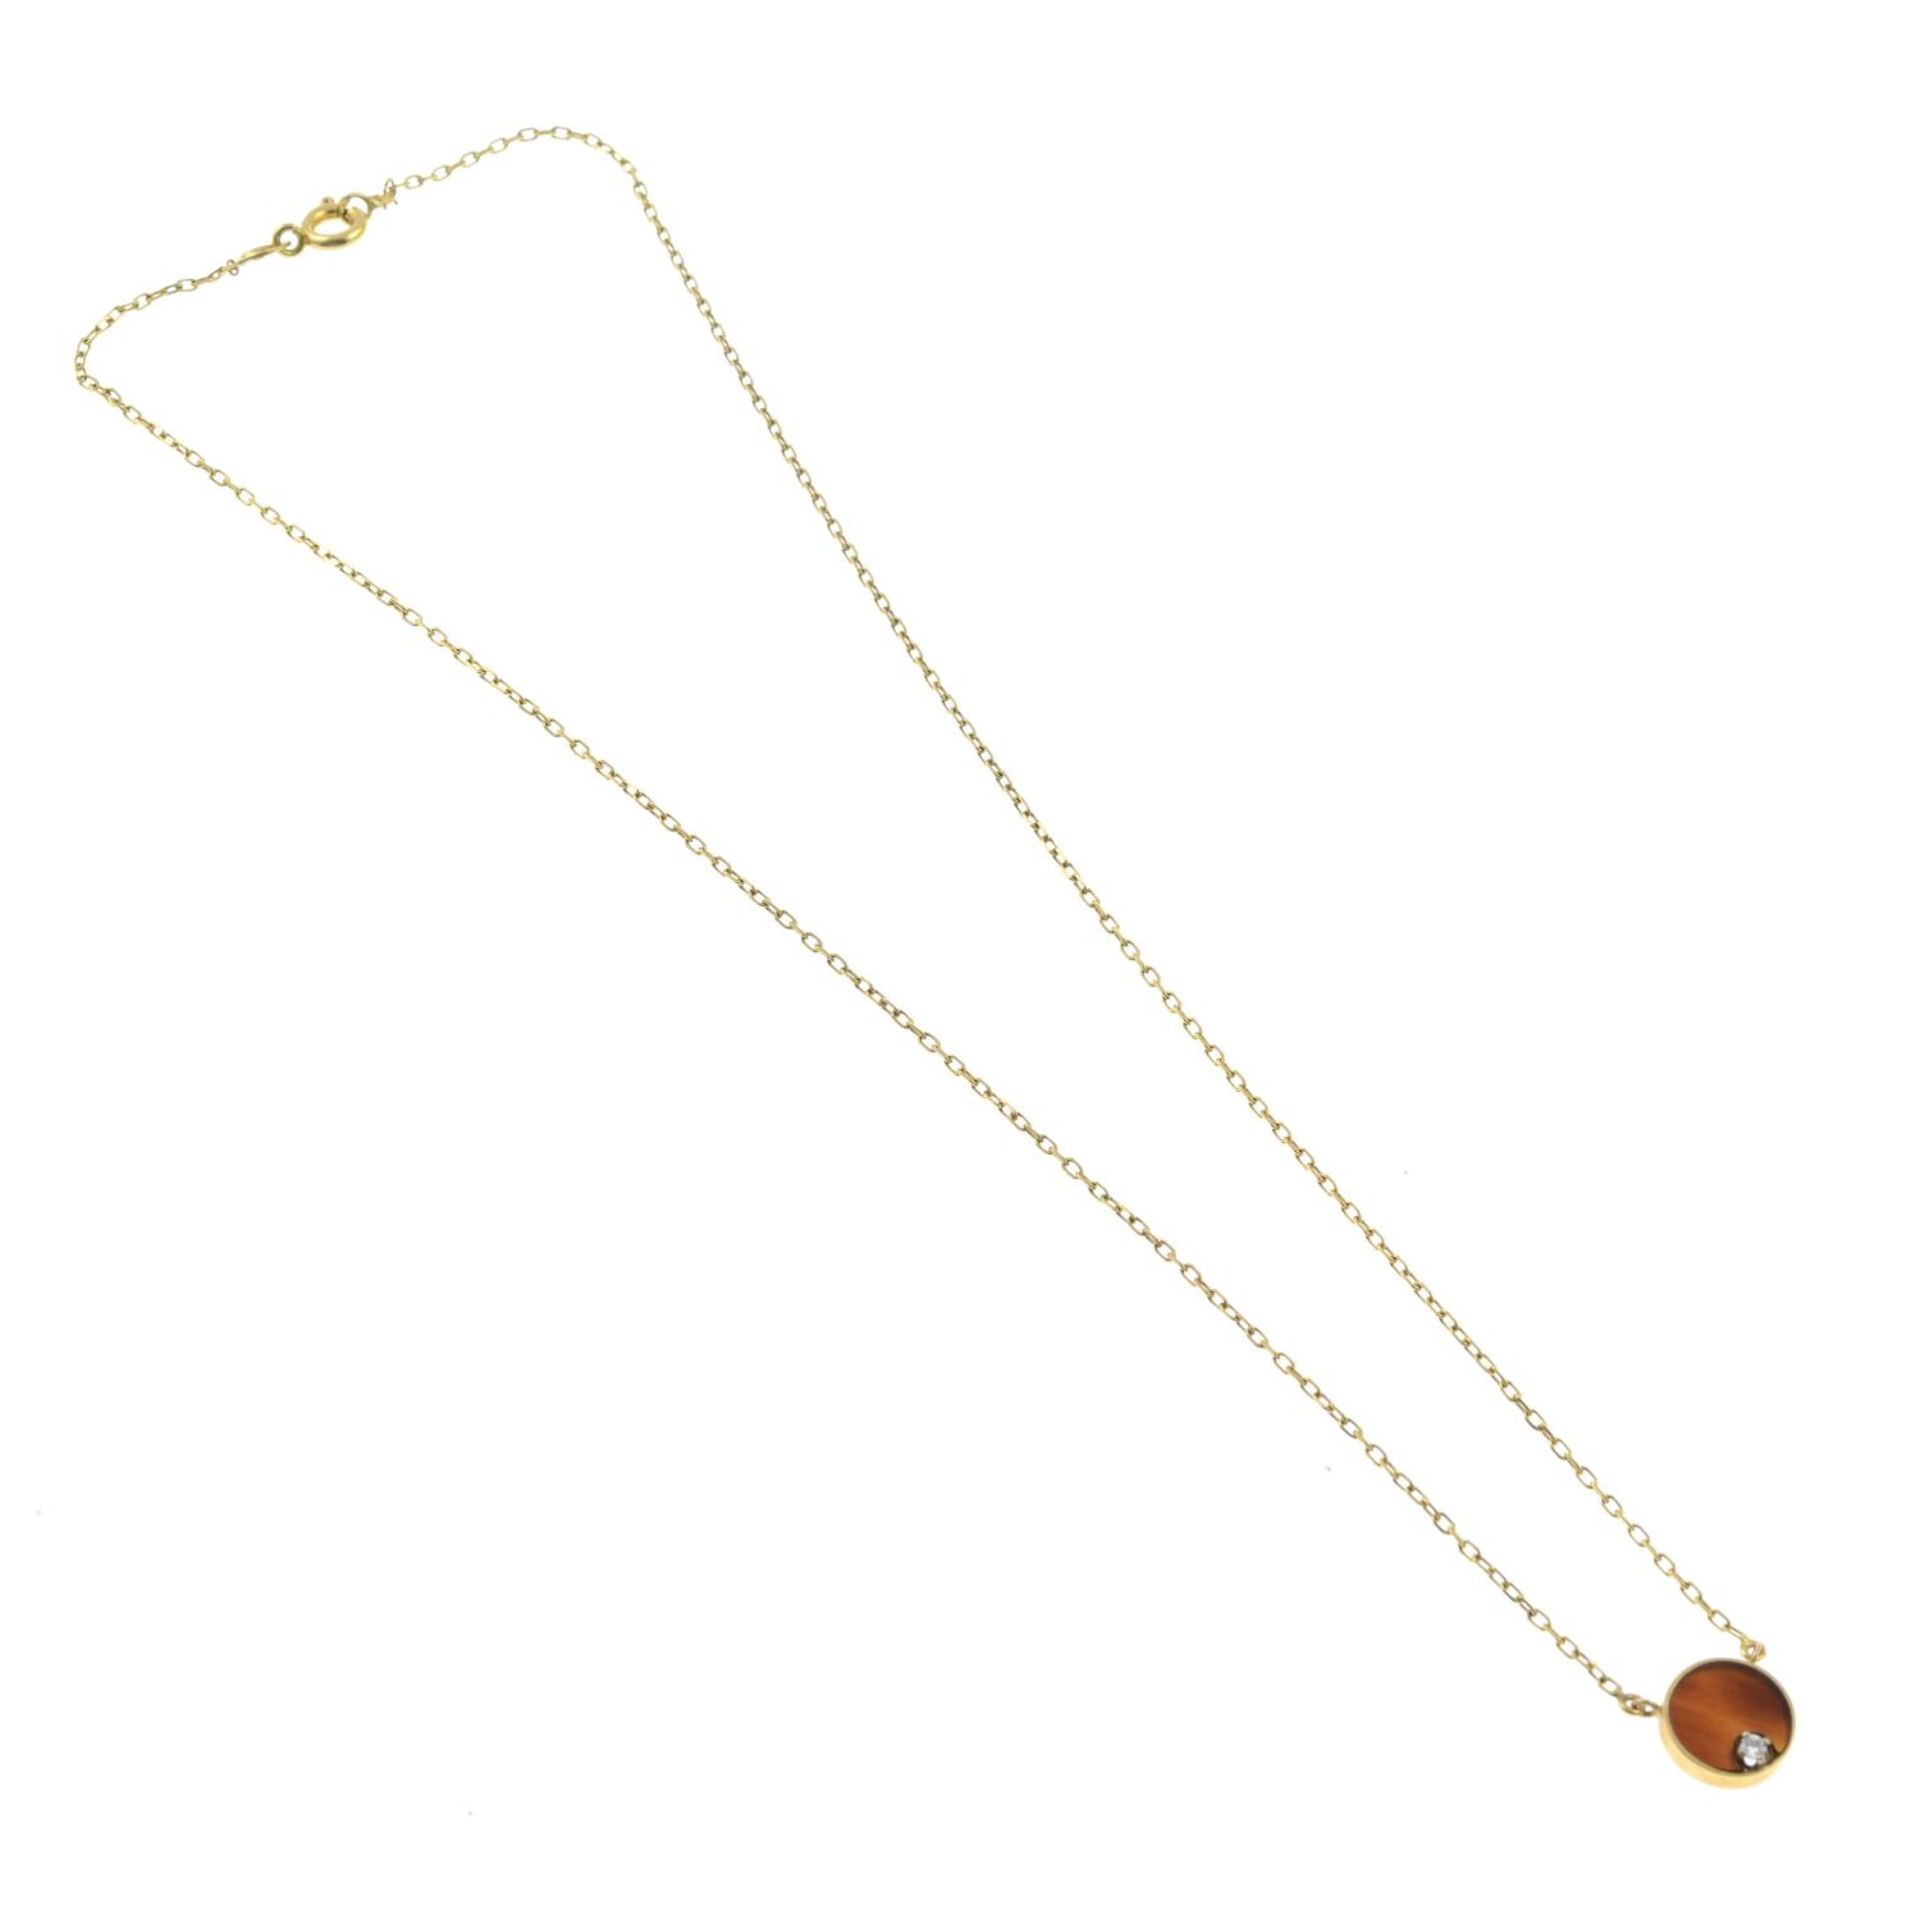 A carnelian and diamond pendant, on an integral trace-link chain.French assay marks. - Image 3 of 3